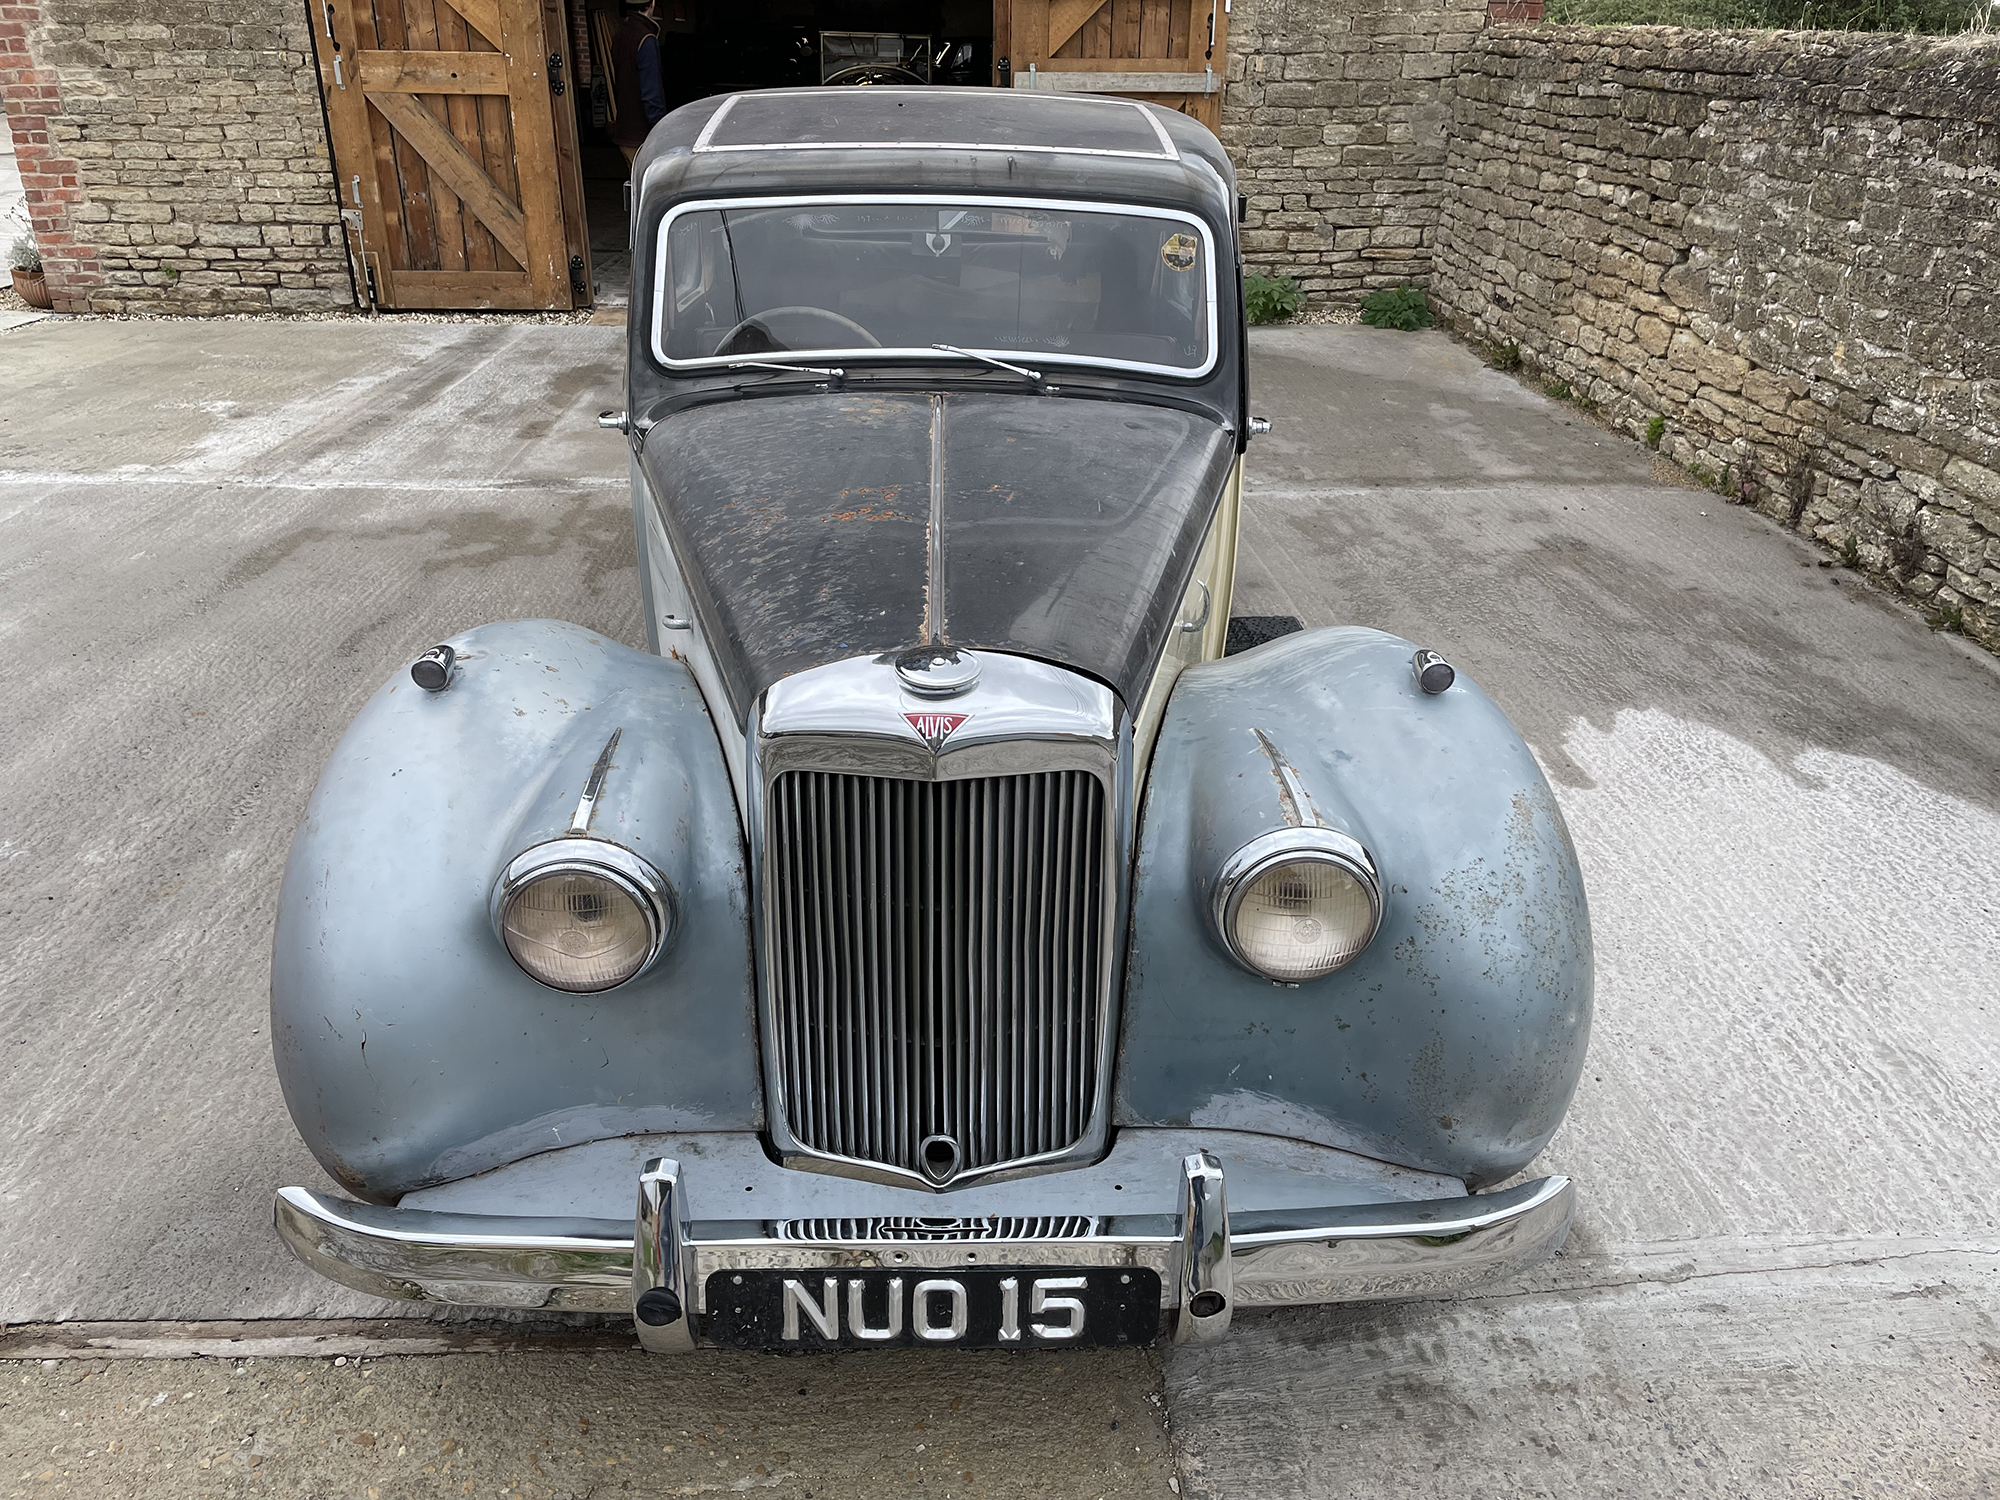 1950s Alvis TA21 Project Reg. no. NUO 15 Chassis no. 24596 Engine no. 24596 - Image 2 of 12